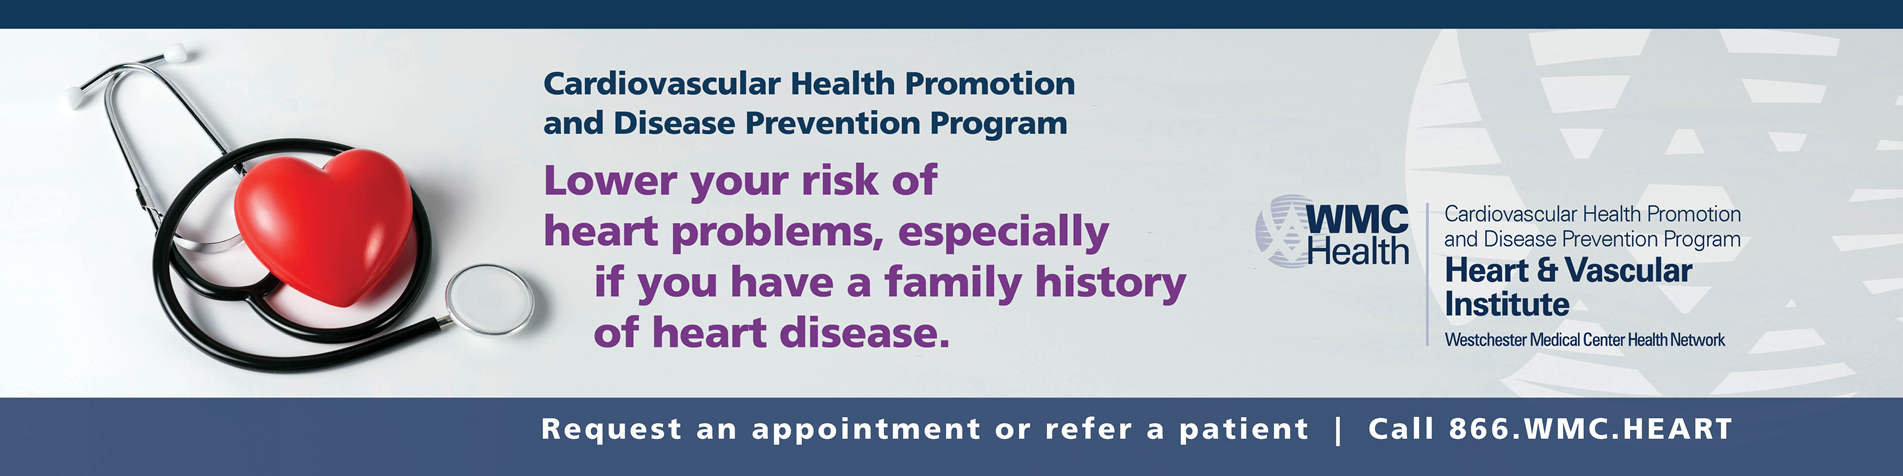 Lower your risk of heart problems. Call 866.WMC.HEART.